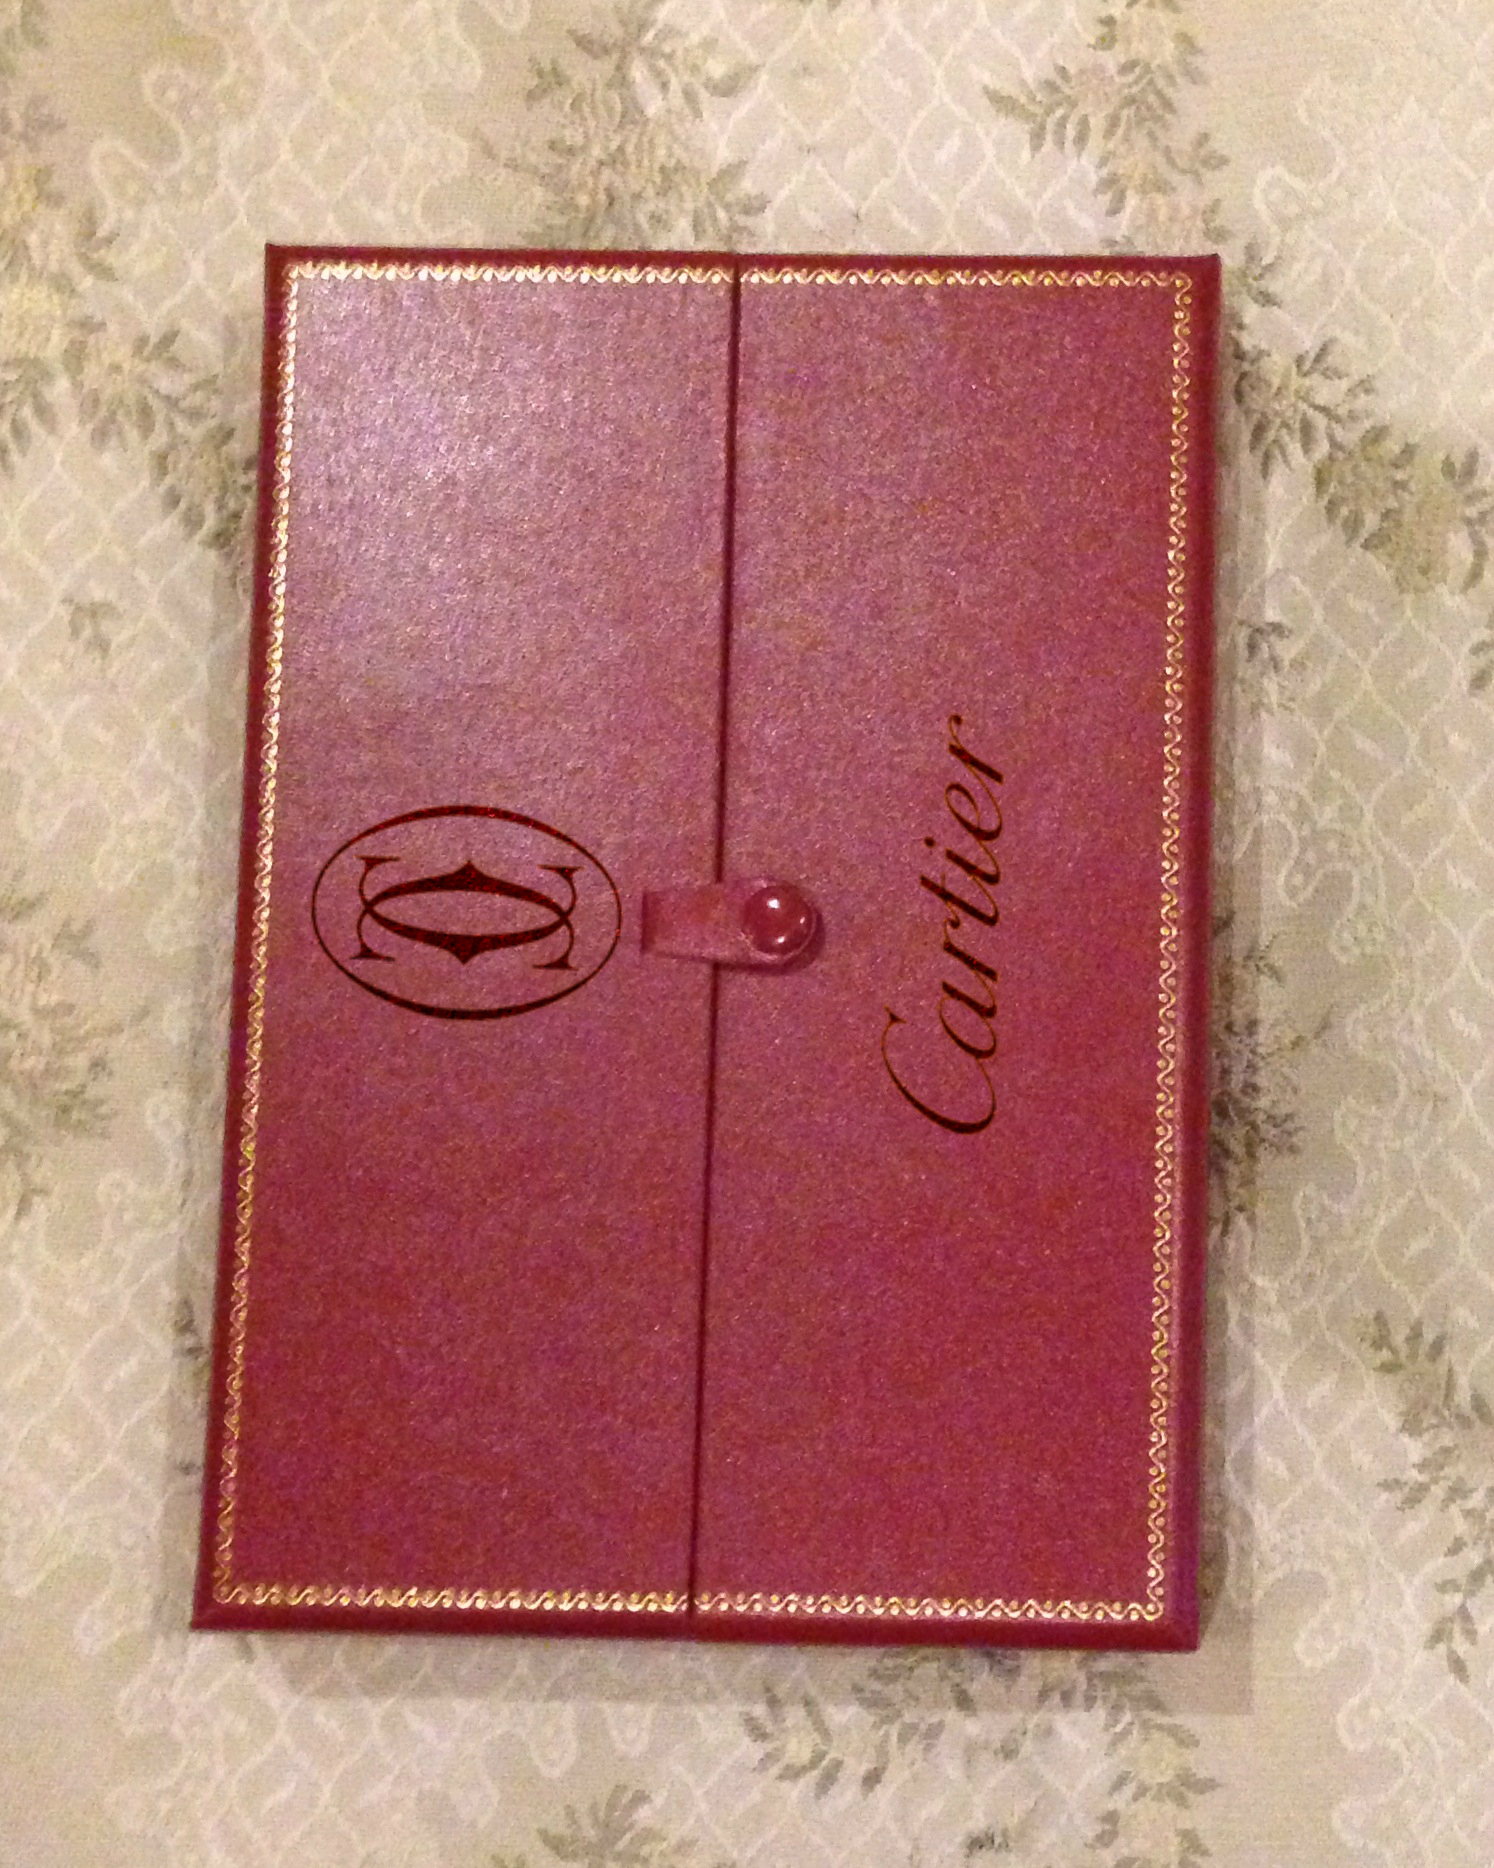 This original signature Cartier statement presentation box was designed for the signature necklace with hand crafted earrings was designed for Lisa Christiansen, this original casting is valued at over 288,000.00 and is one of Cartier's finest origin